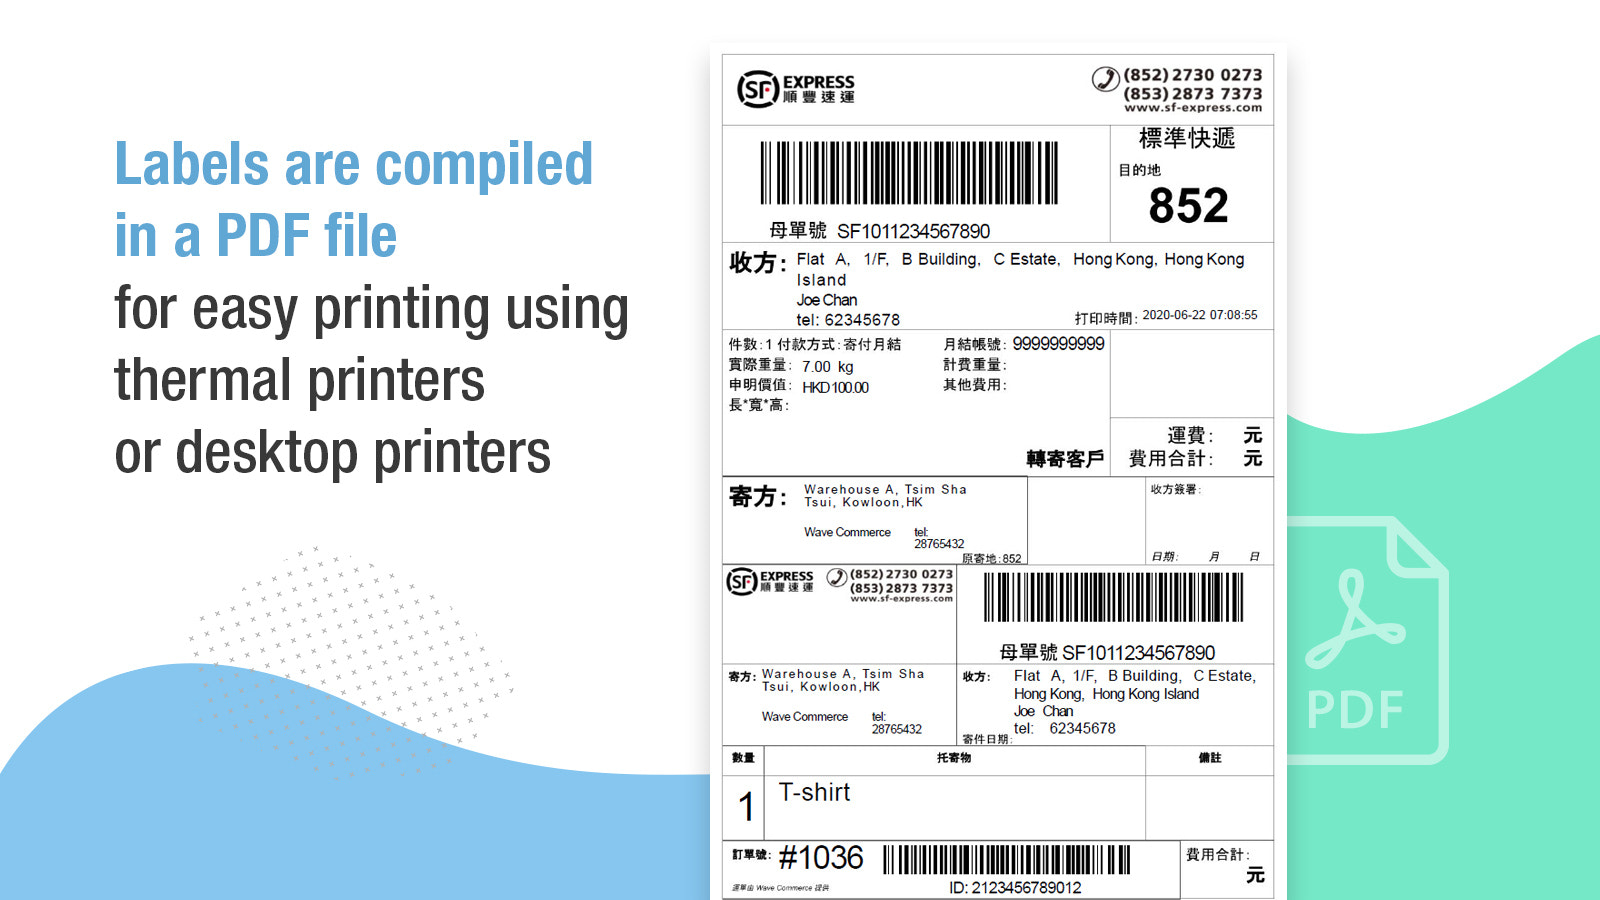 Labels are compiled in a PDF file for easy printing